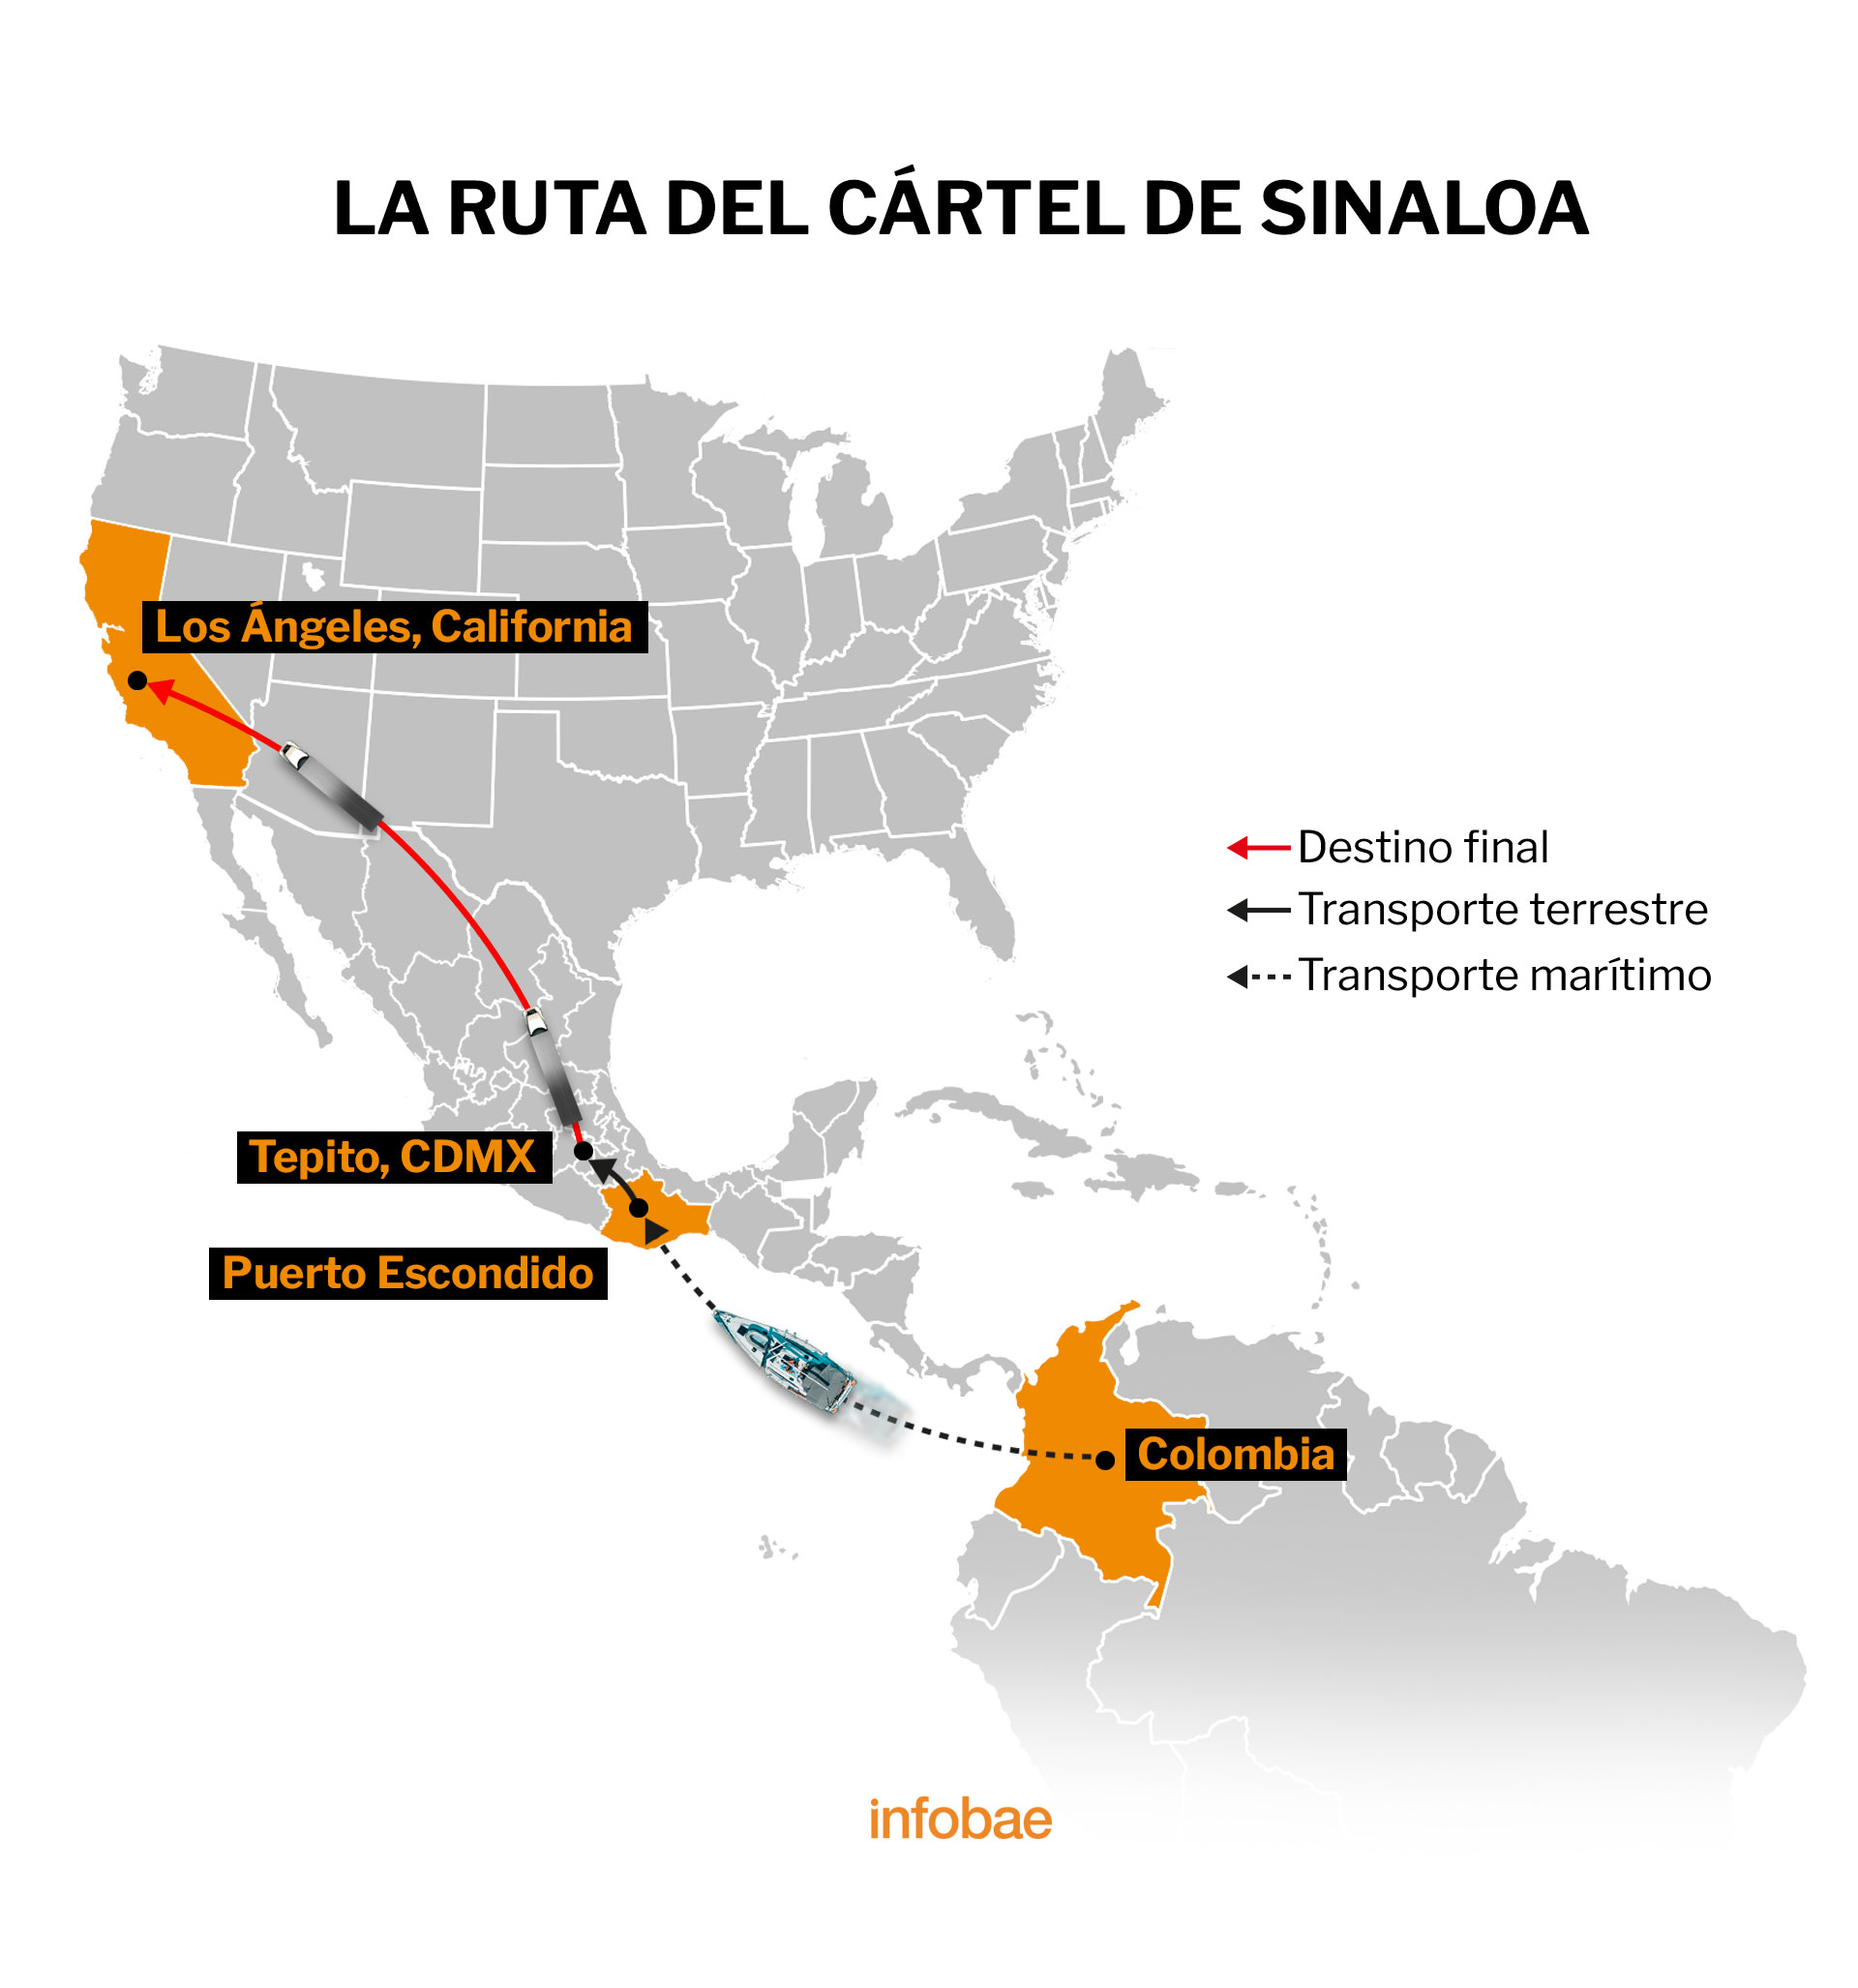 The Sinaloa Cartel has a strong presence in other parts of the world, which has led to clashes with the CJNG